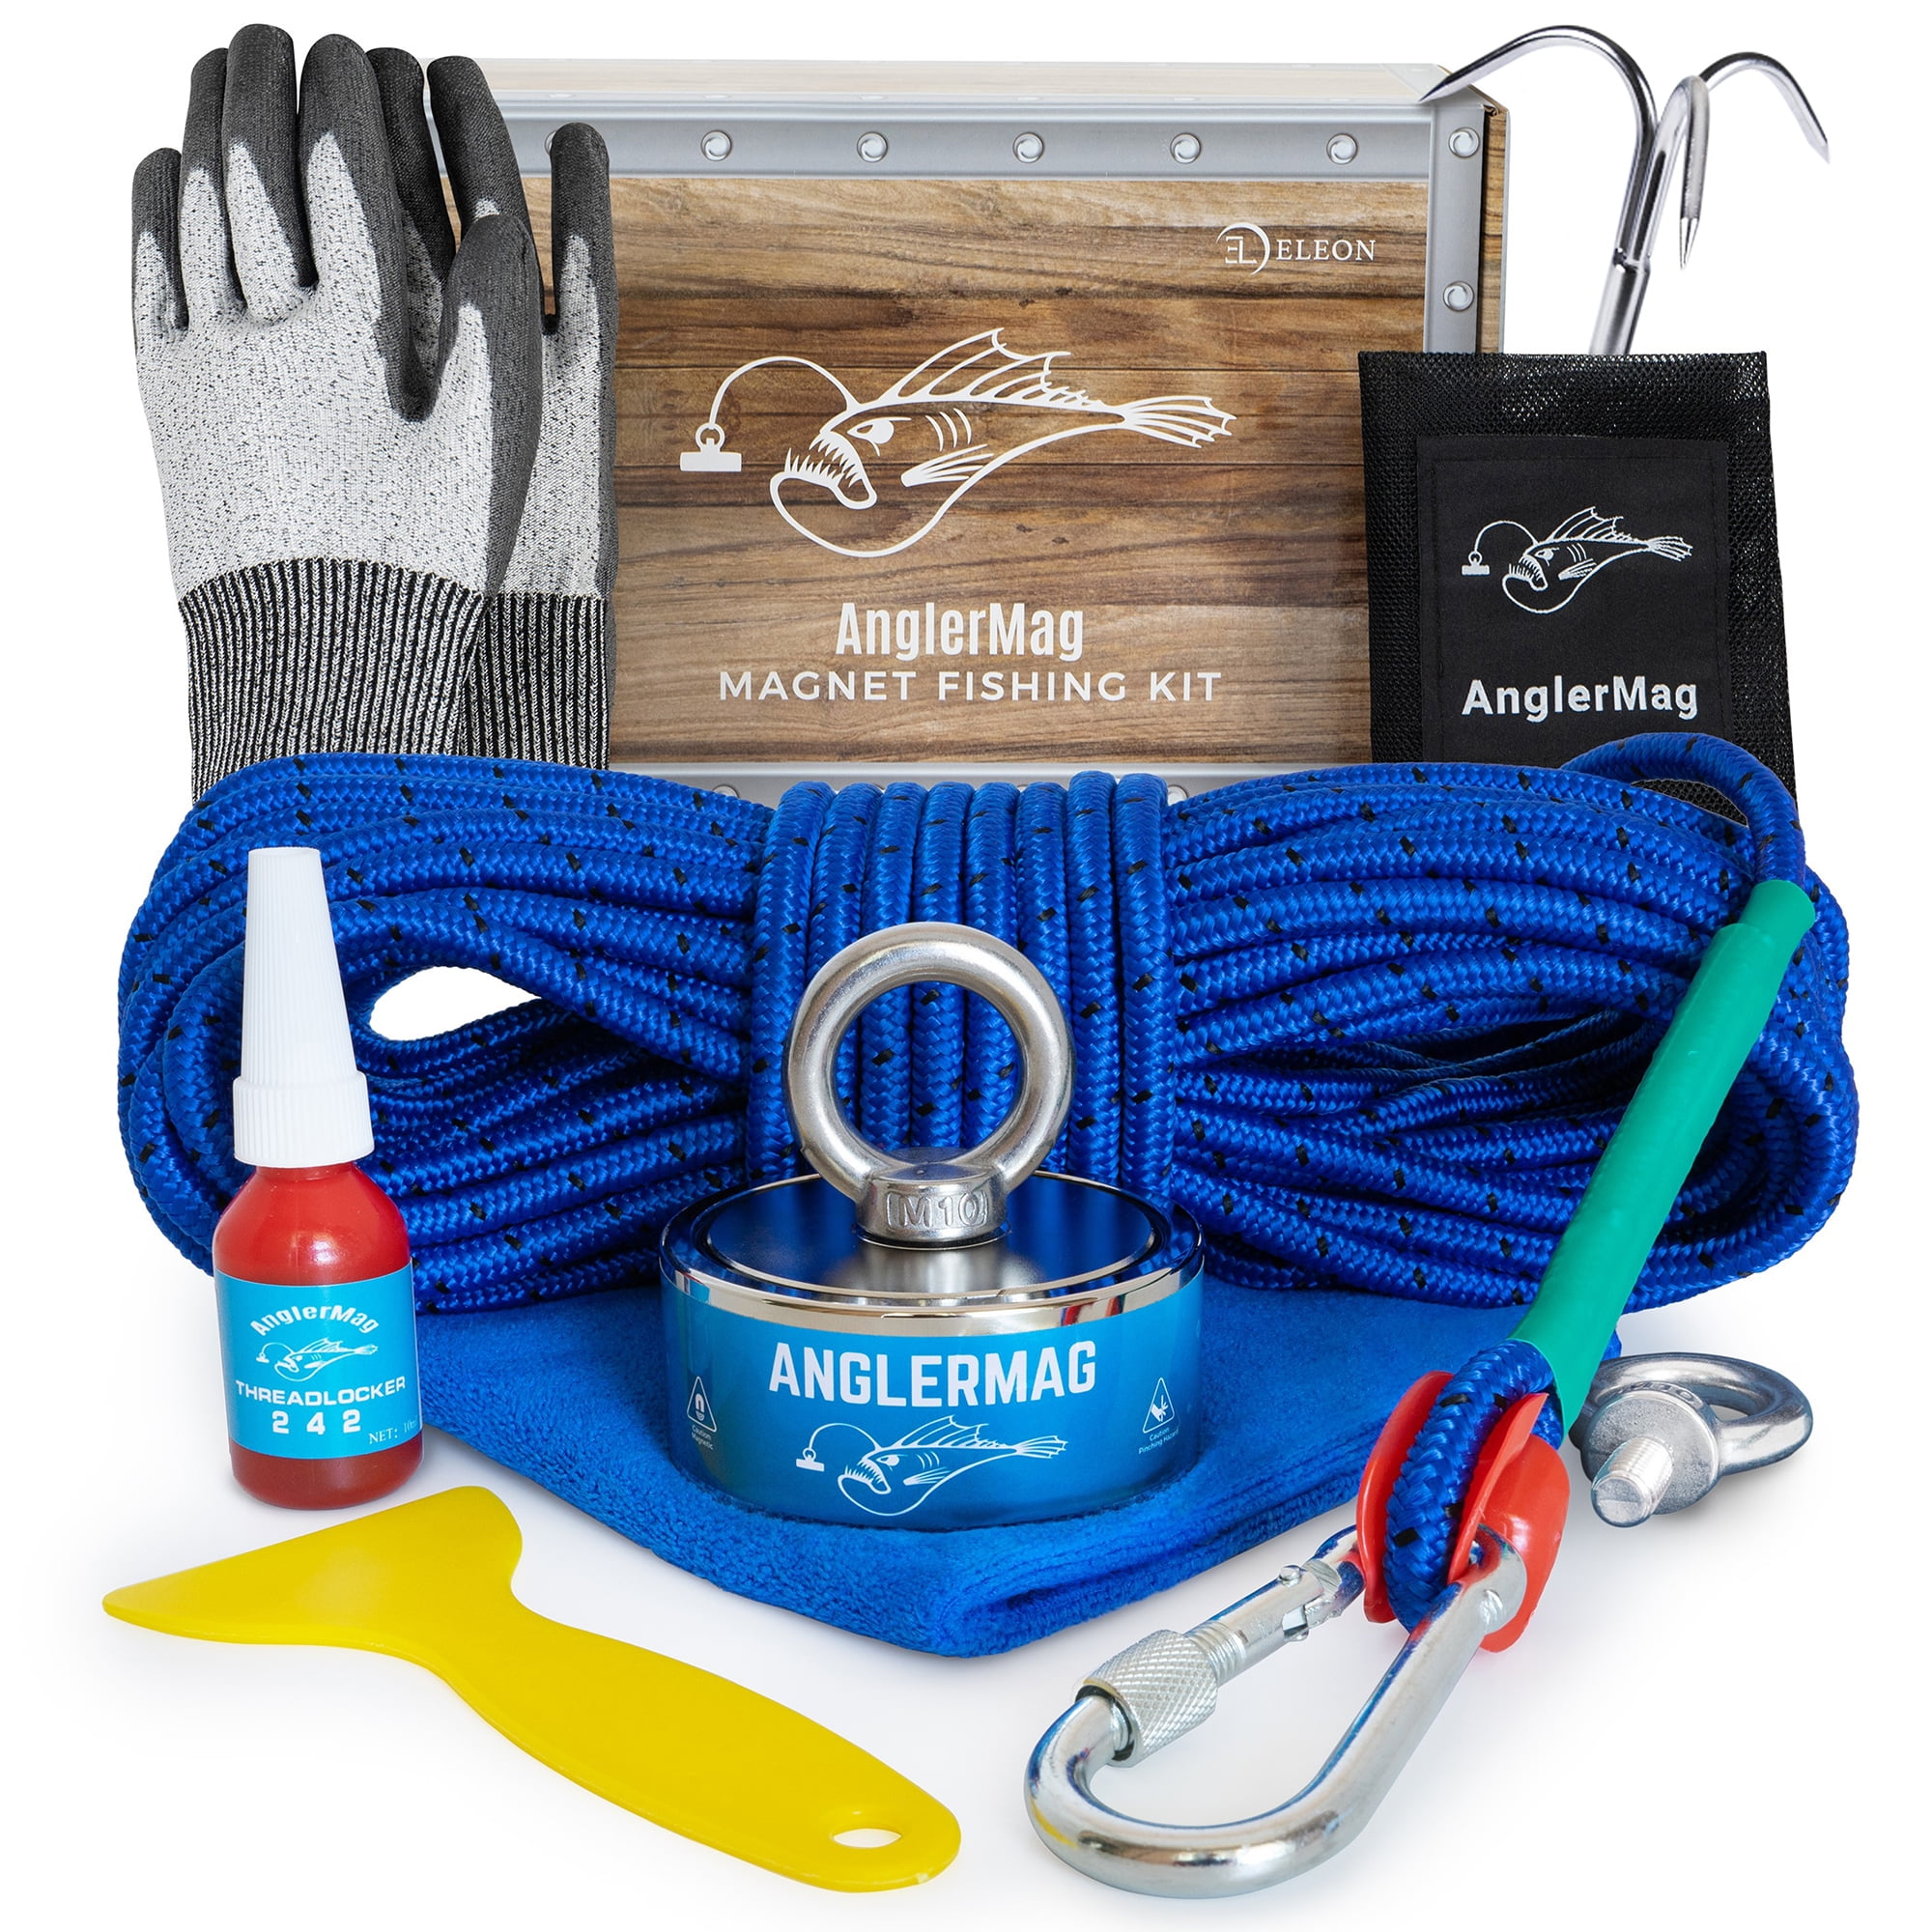 AnglerMag Magnet Fishing Kit, 1250 lbs Double Sided Magnet with Rope,  Carabiner, Gloves, Grappling Hook & Carrying Bag, 10 Piece Complete Set 